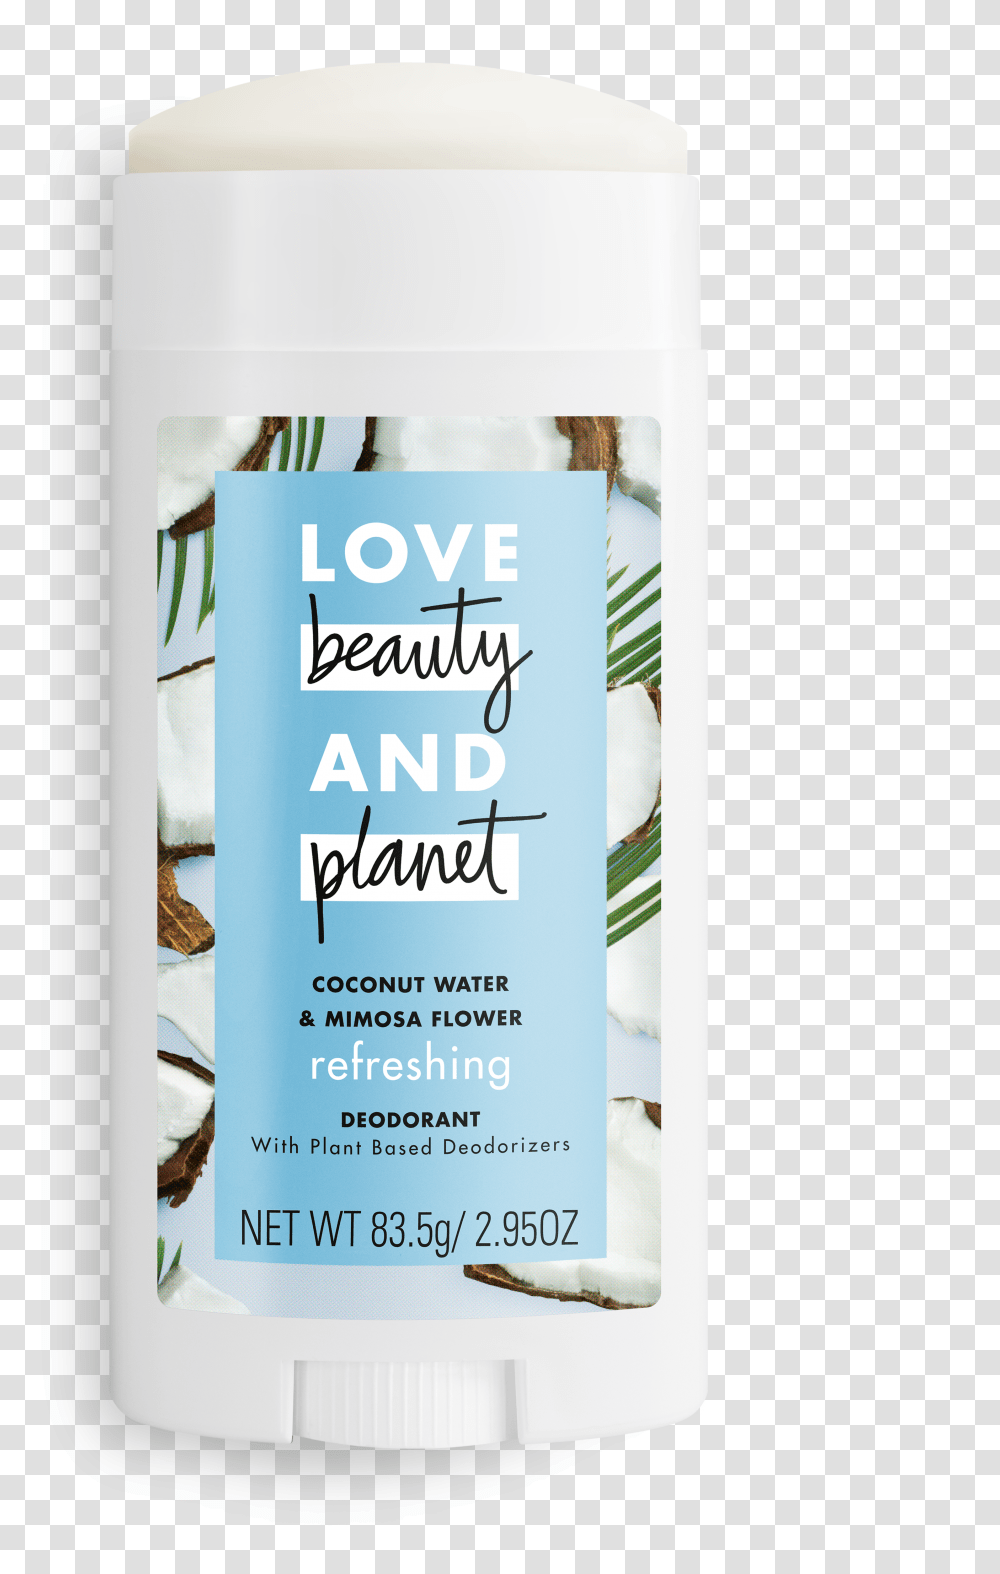 Coconut Water Mimosa Flower Body Love Beauty Planet Deodorant Transparent Png